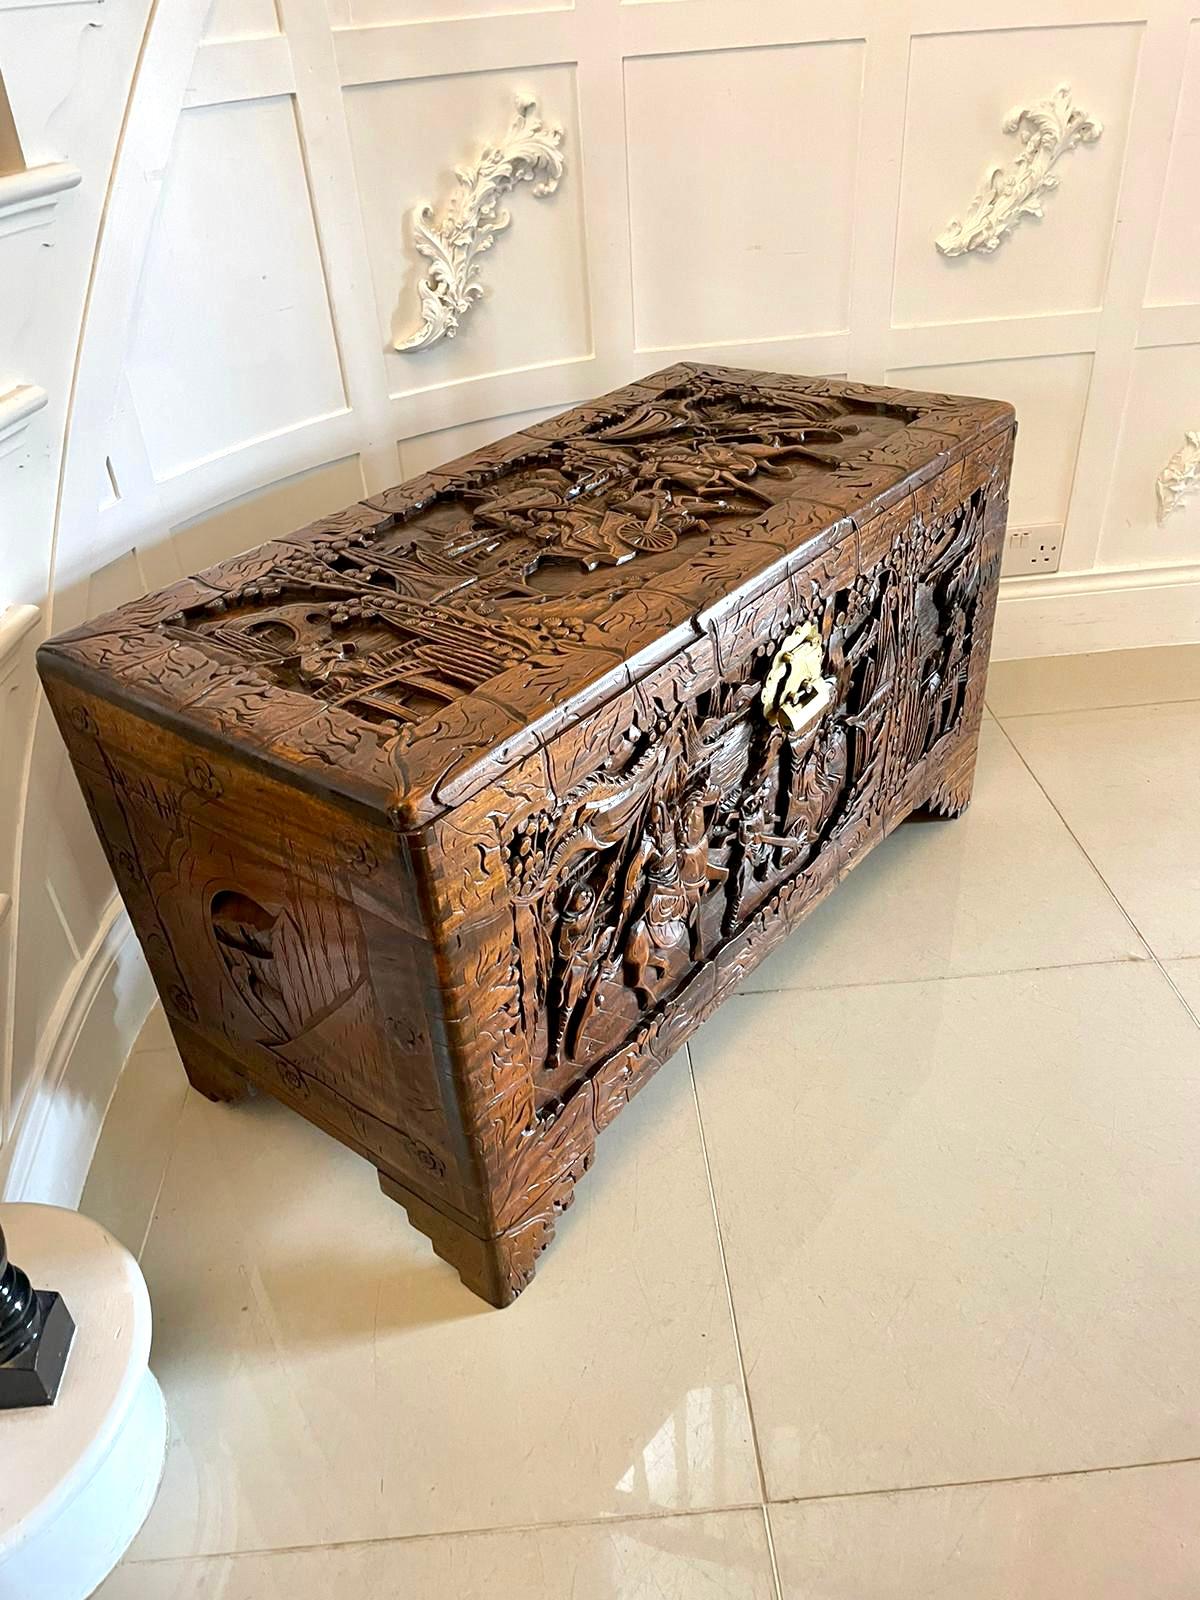 Outstanding quality antique Chinese carved camphor wood freestanding chest having outstanding quality carved panels on all sides, lift up lid with original brass lock and key opening to reveal a large storage compartment 


Beautifully carved and